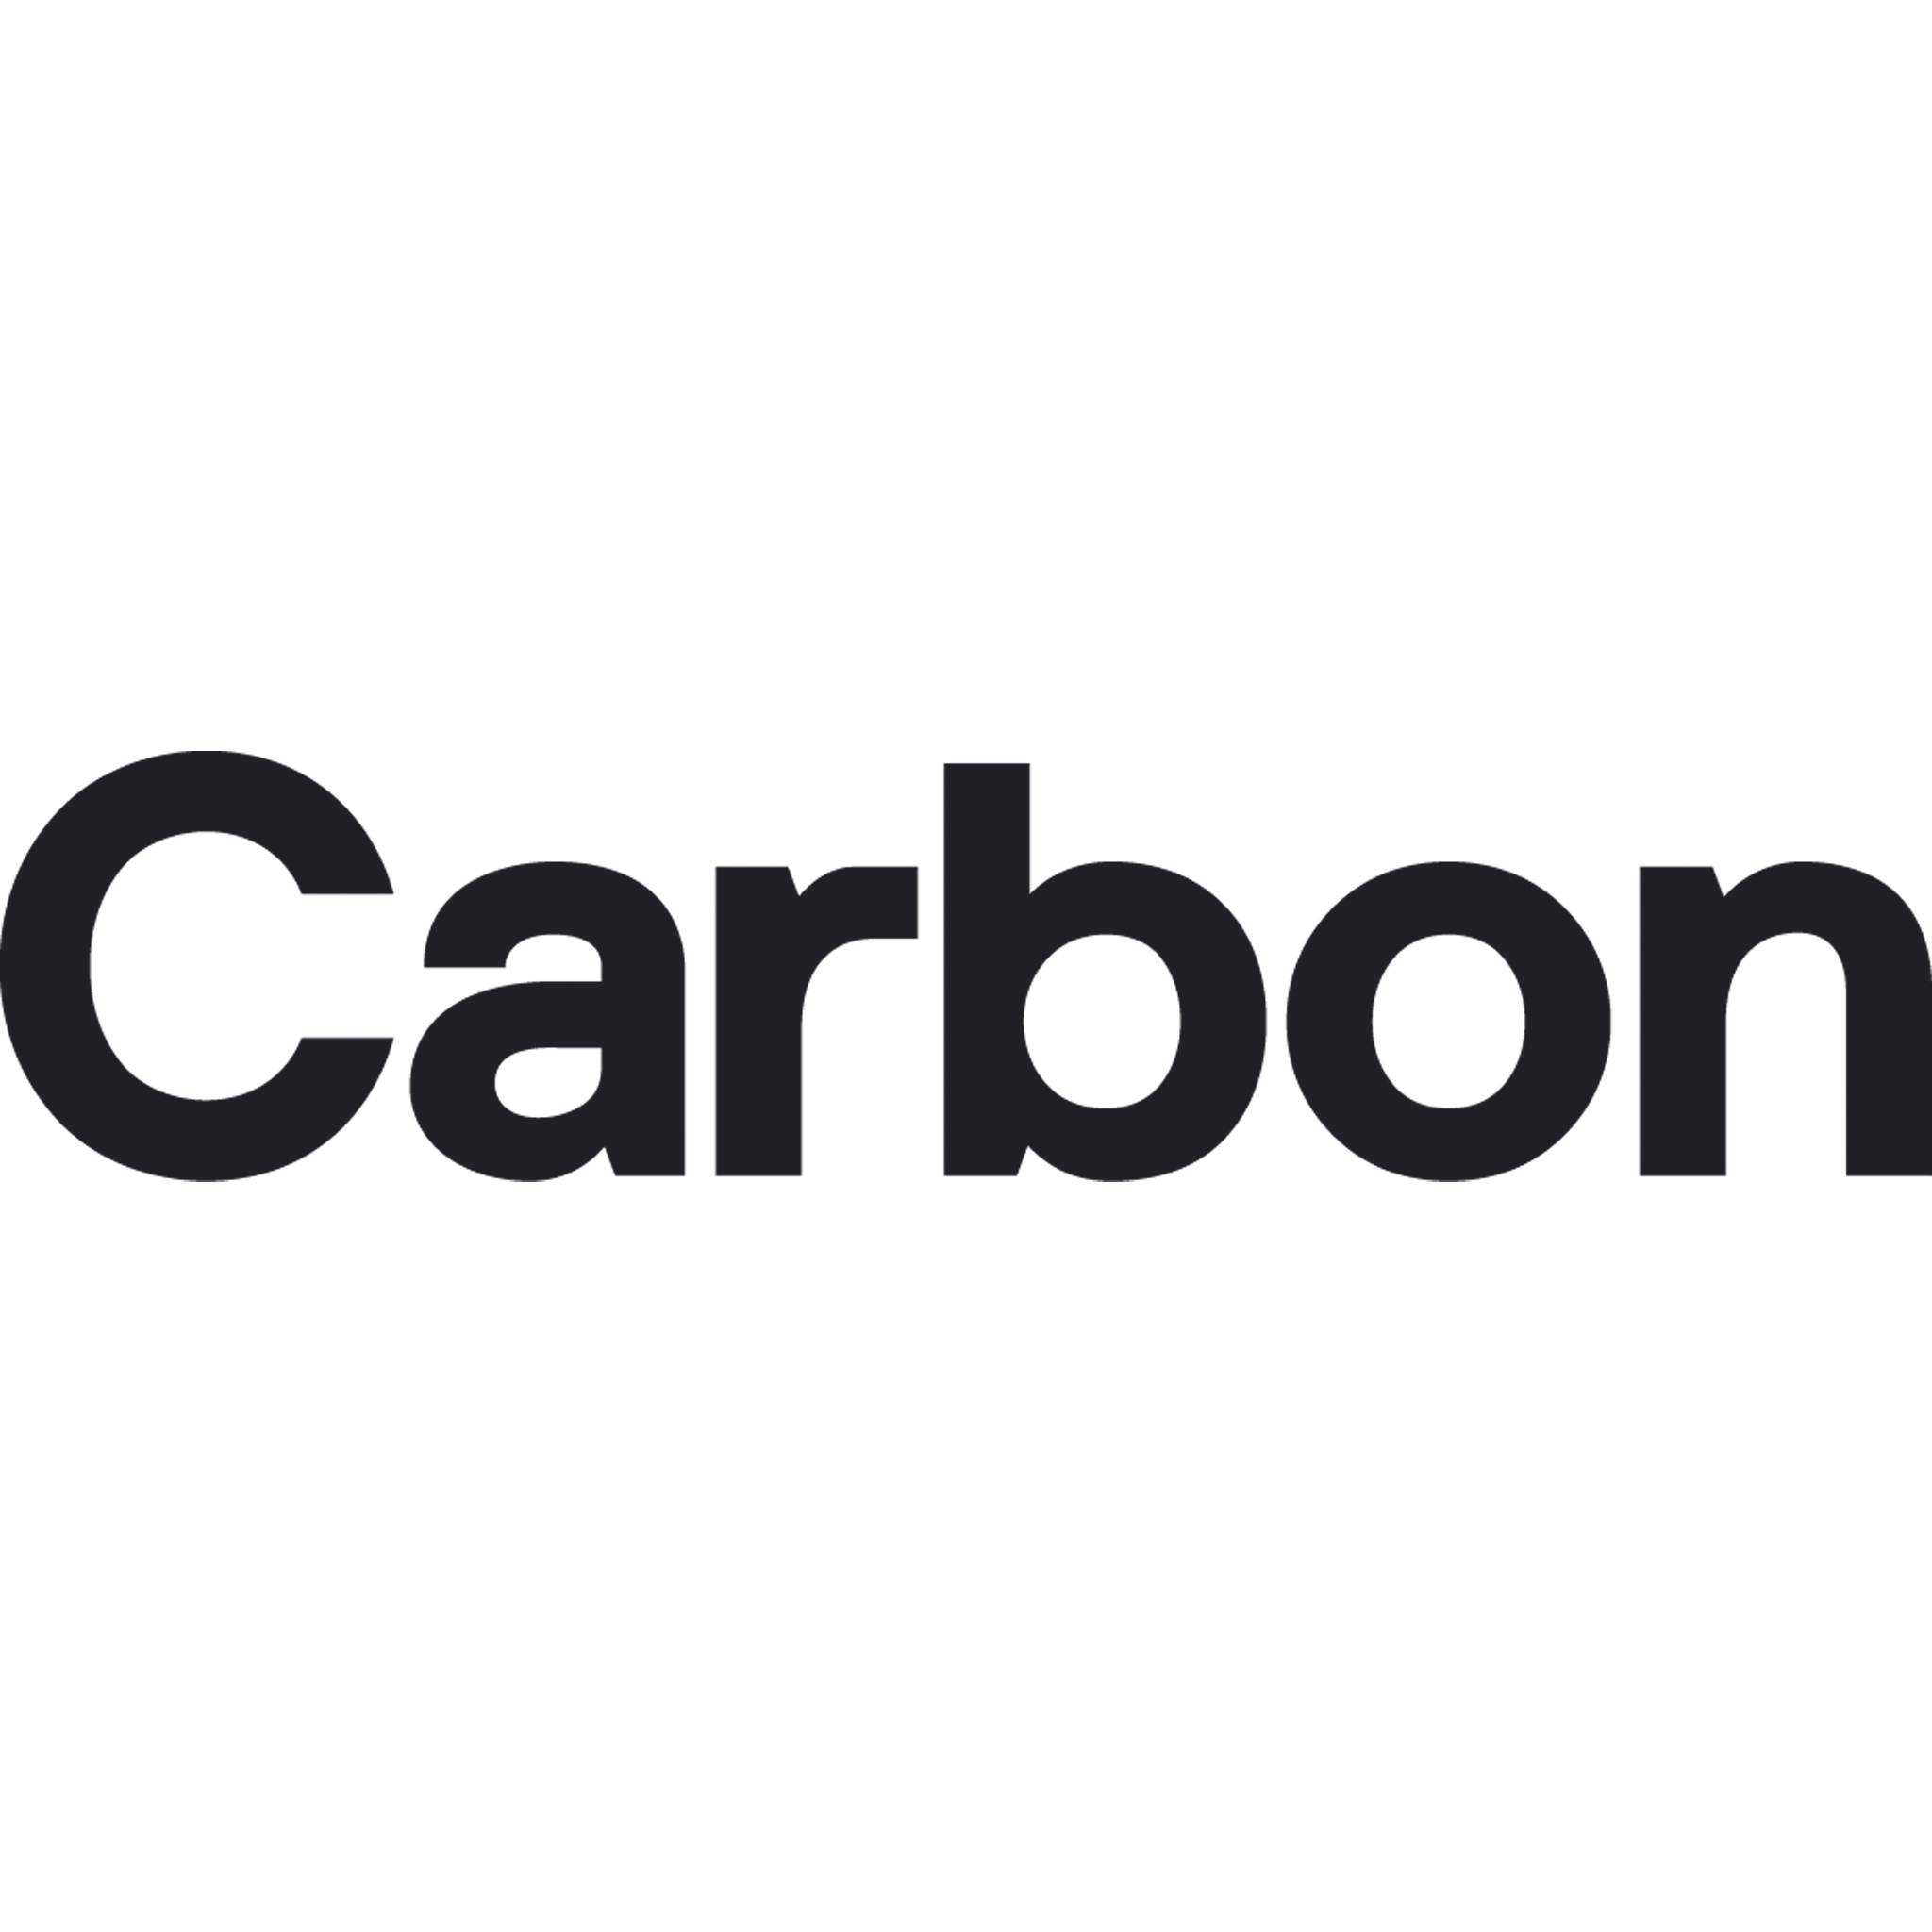 Midwest Prototyping partner logo - carbon